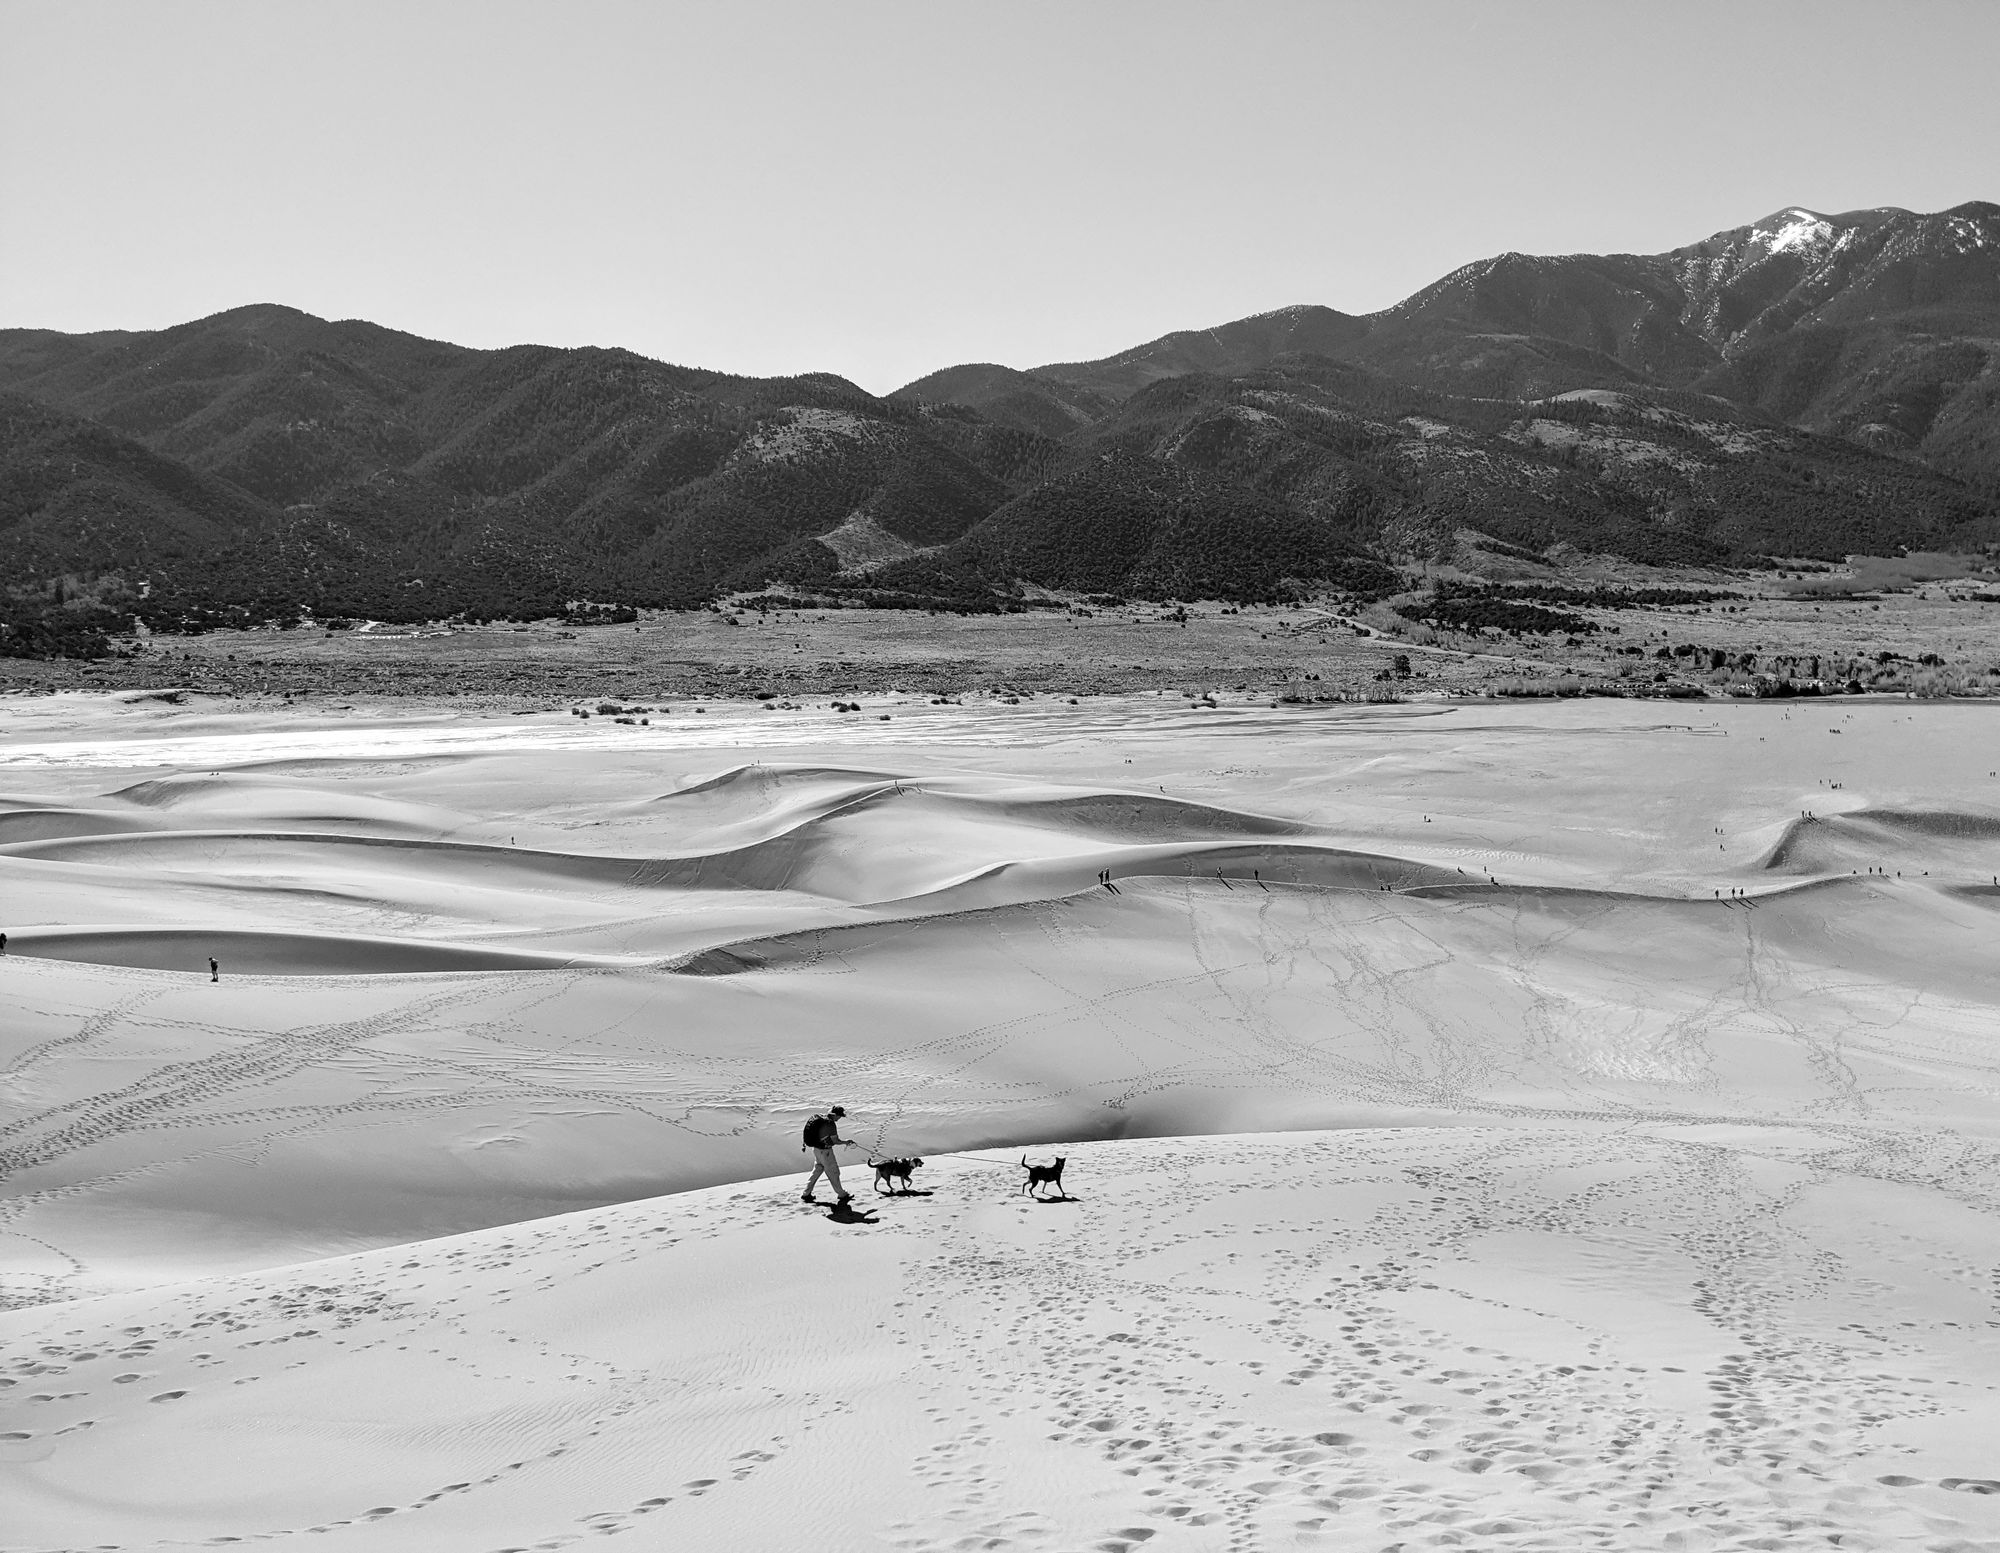 Visiting Great Sand Dunes National Park with Dogs